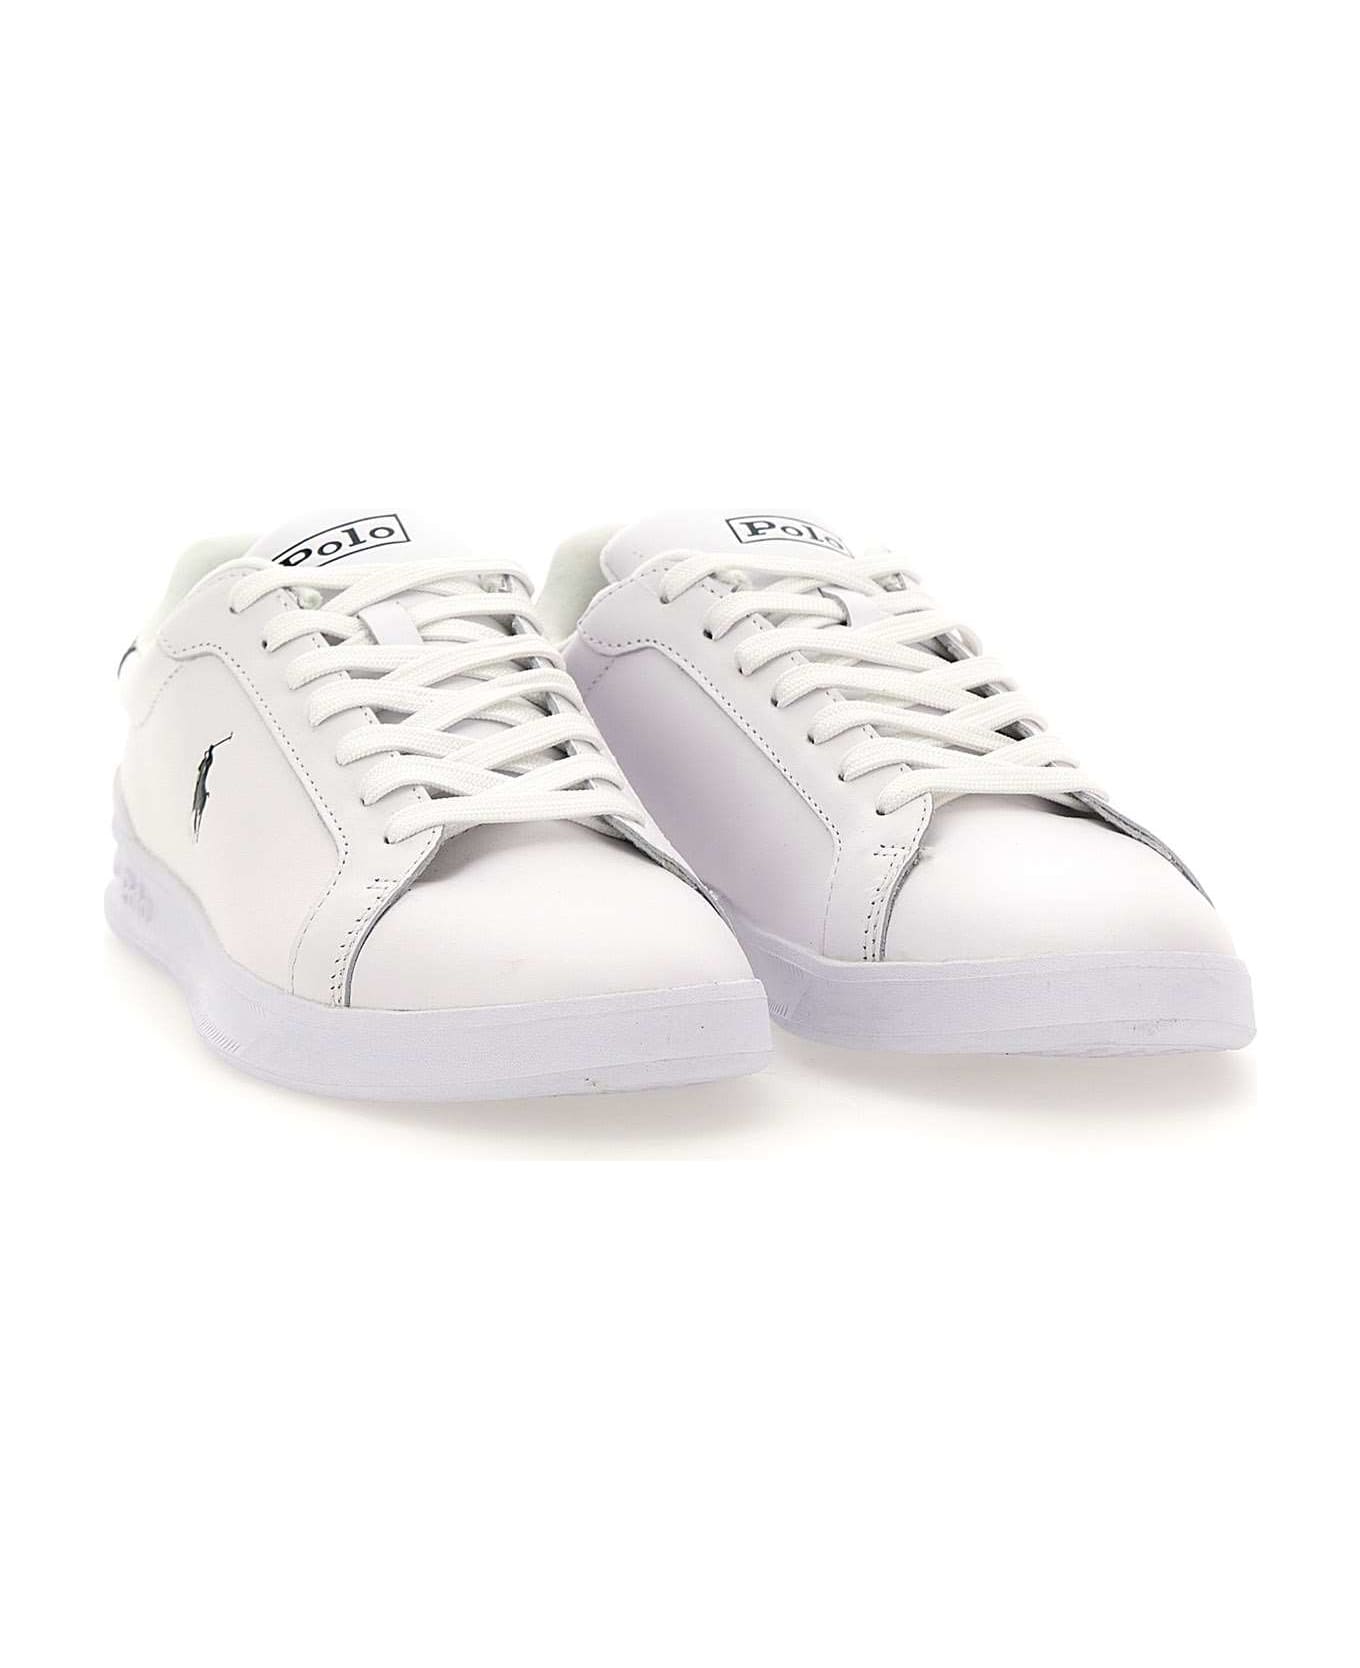 Polo Ralph Lauren 'heritage Court' Leather Sneakers - WHITE